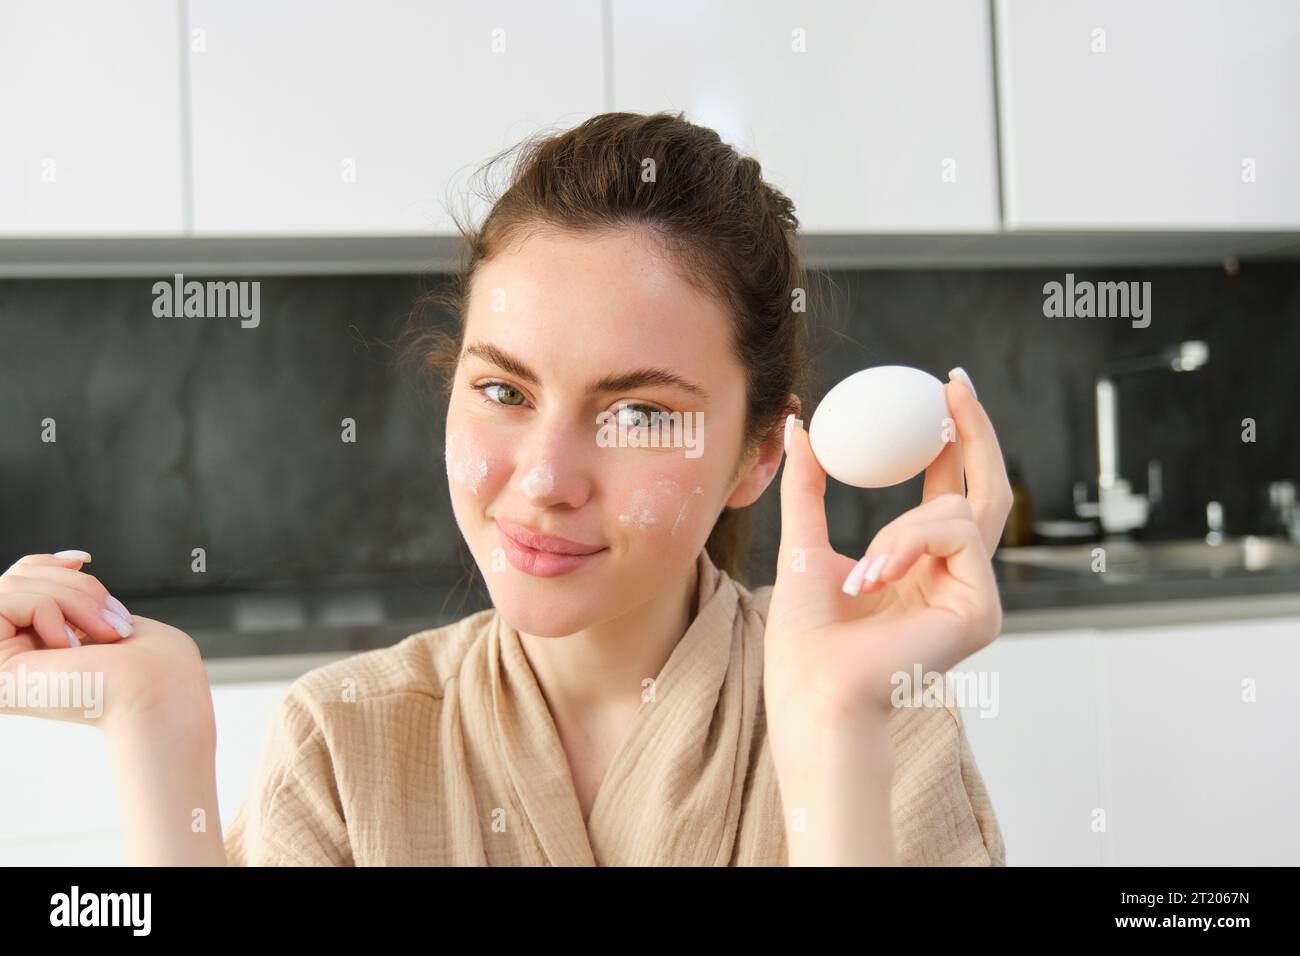 Attractive young cheerful girl baking at the kitchen, making dough, holding recipe book, having ideas. Stock Photo